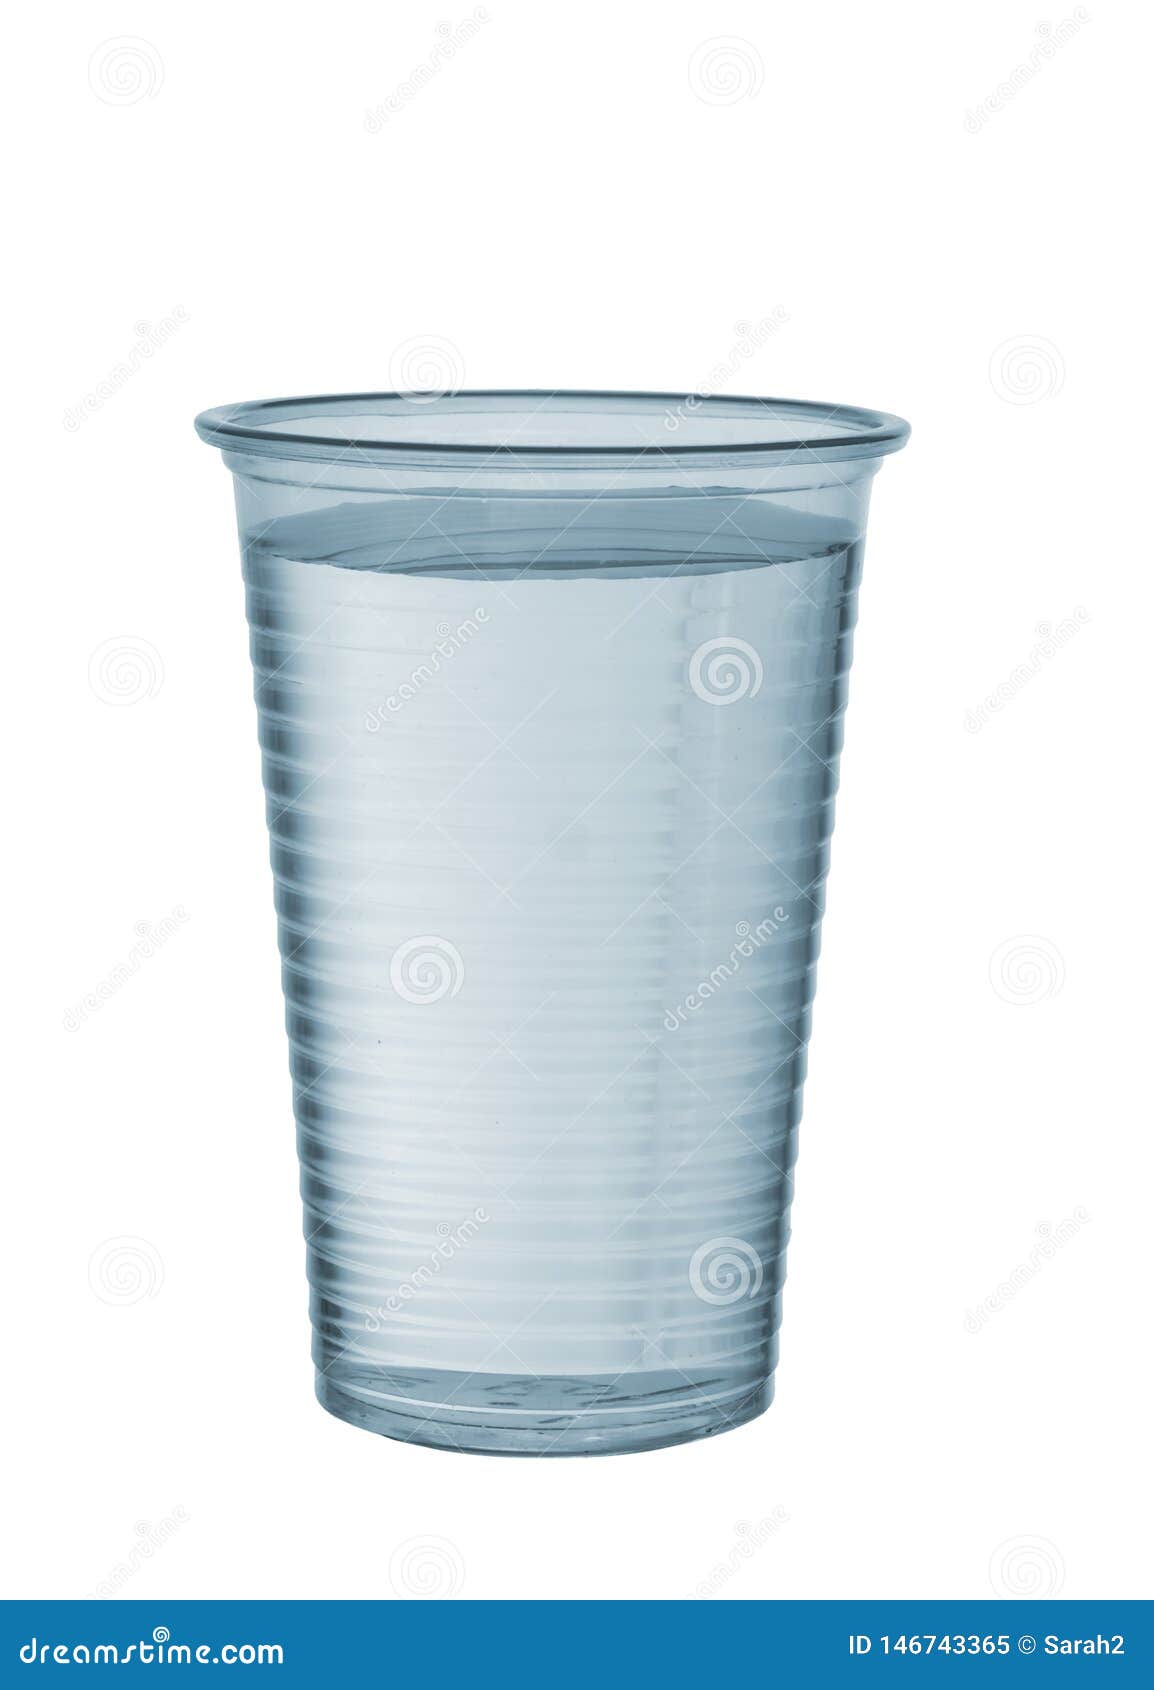 Plastic Cup Of Water Isolated On White Background. Blue